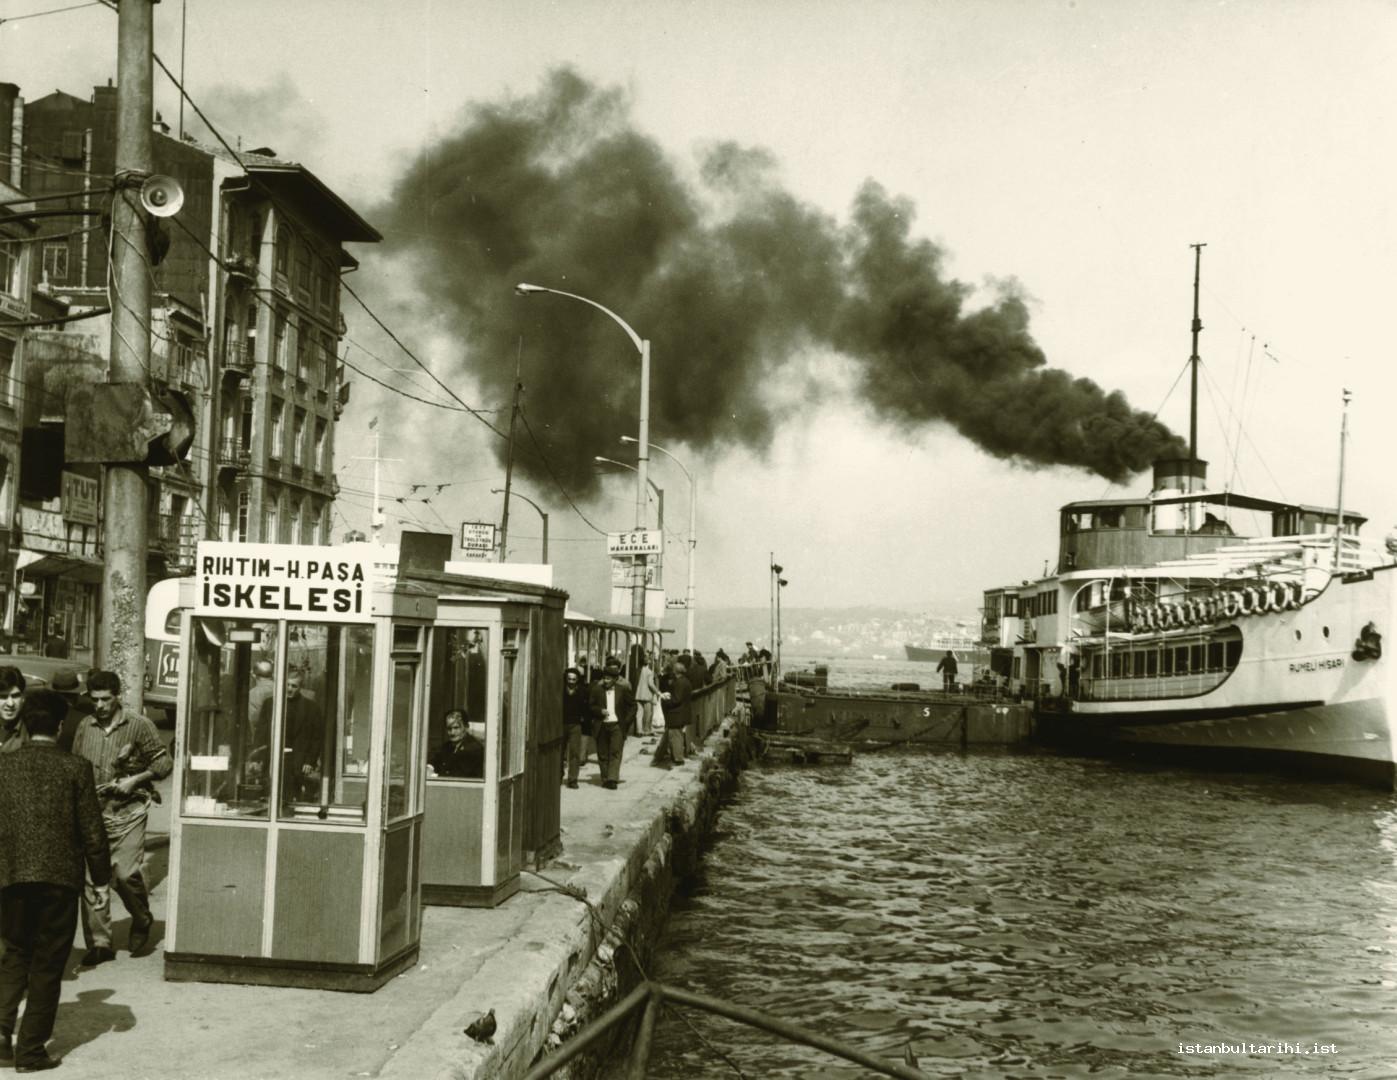 15- Karaköy pier… The city line ferry approaching the pier. The ticket booths are on the front